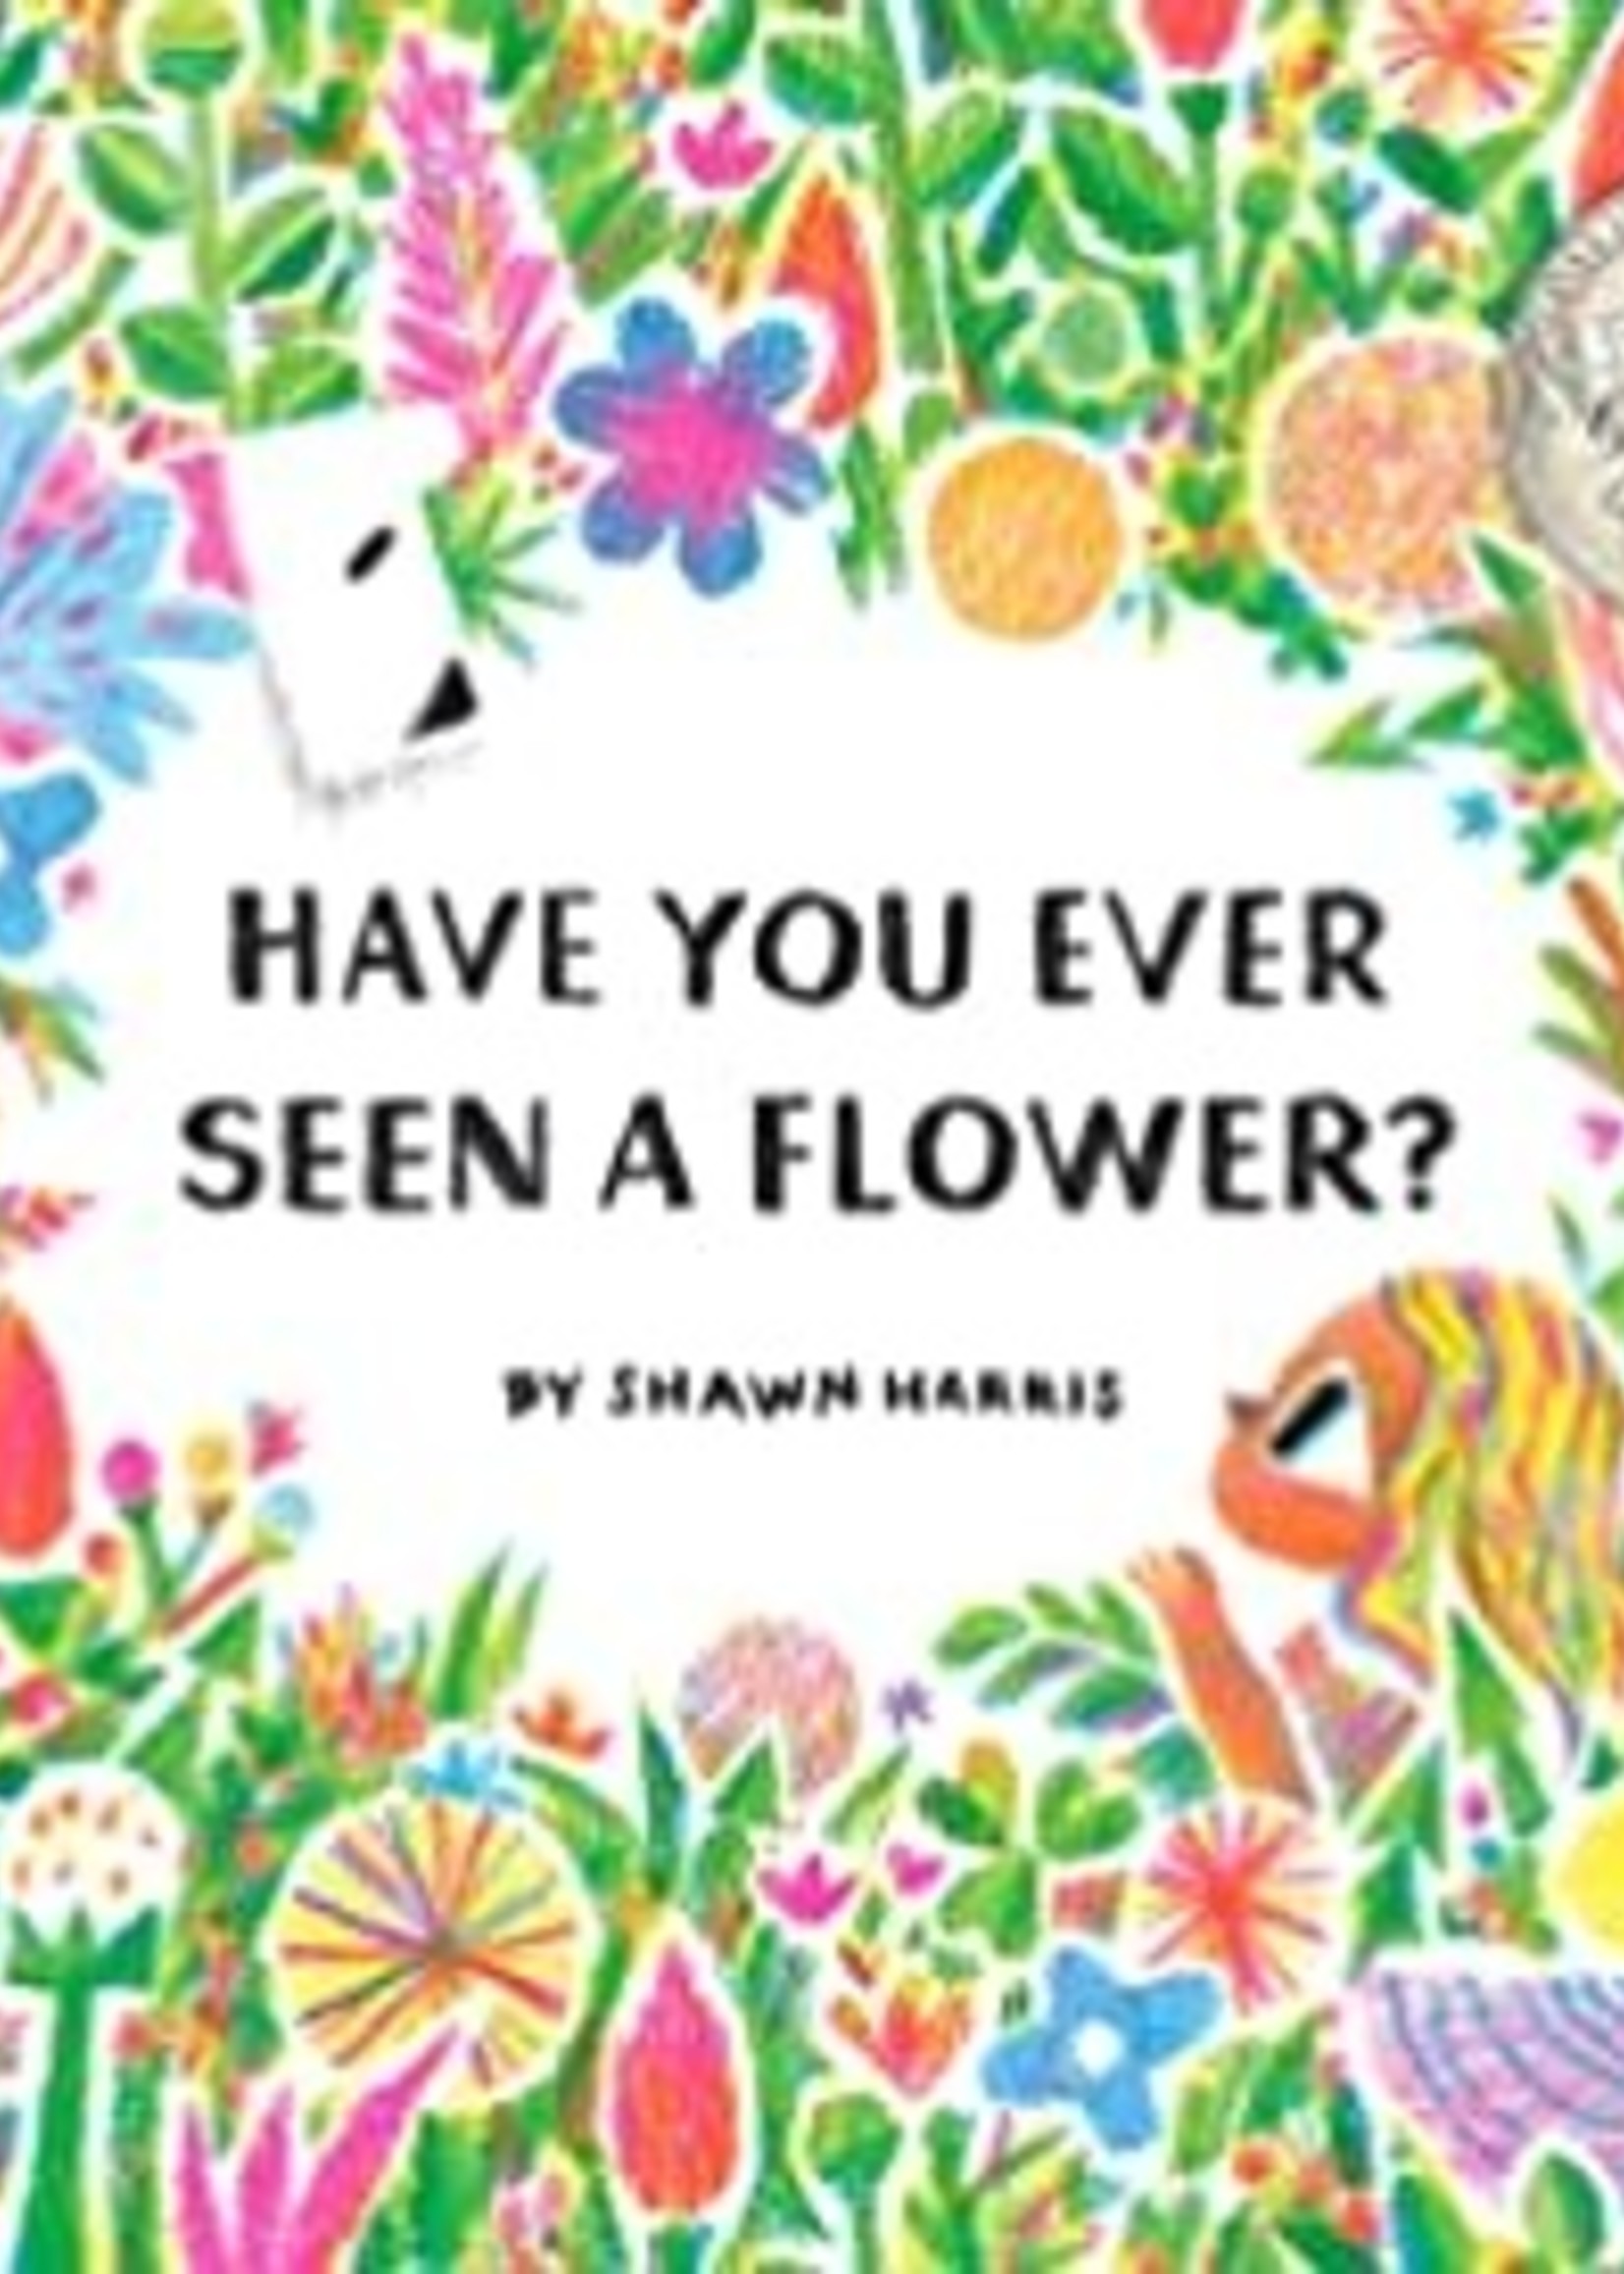 Have You Ever Seen a Flower? by Shawn Harris